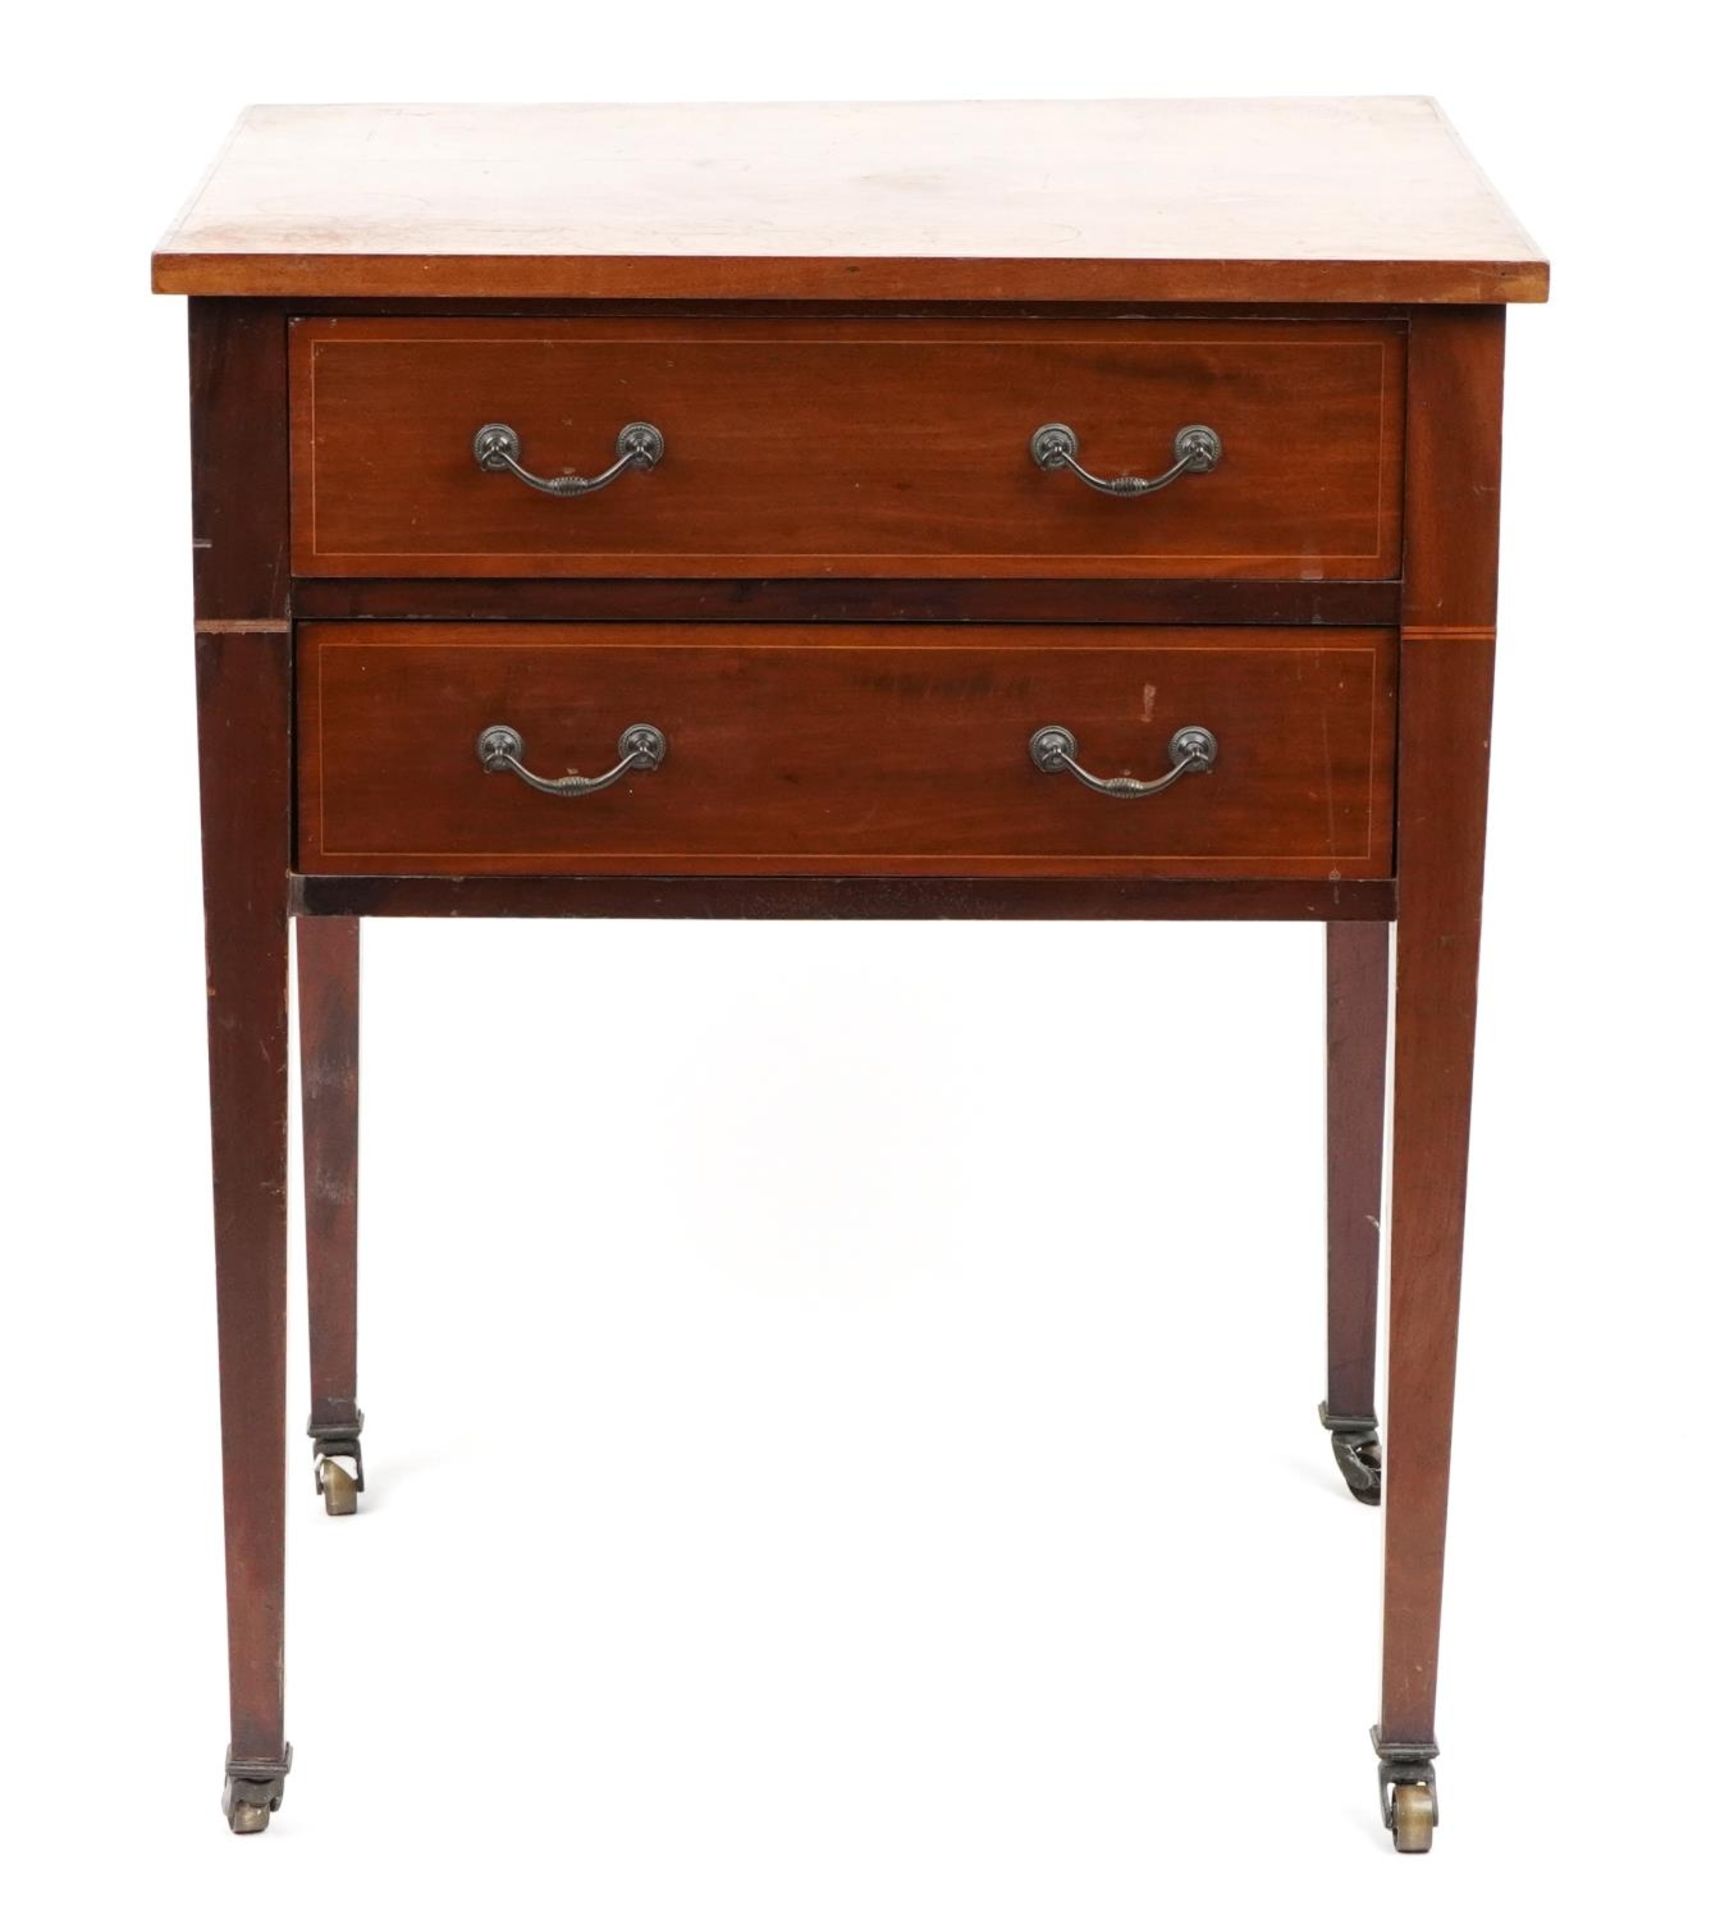 Jas Shoolbred & Co, Edwardian inlaid mahogany two drawer side table on tapering legs, 76cm H x - Image 2 of 6